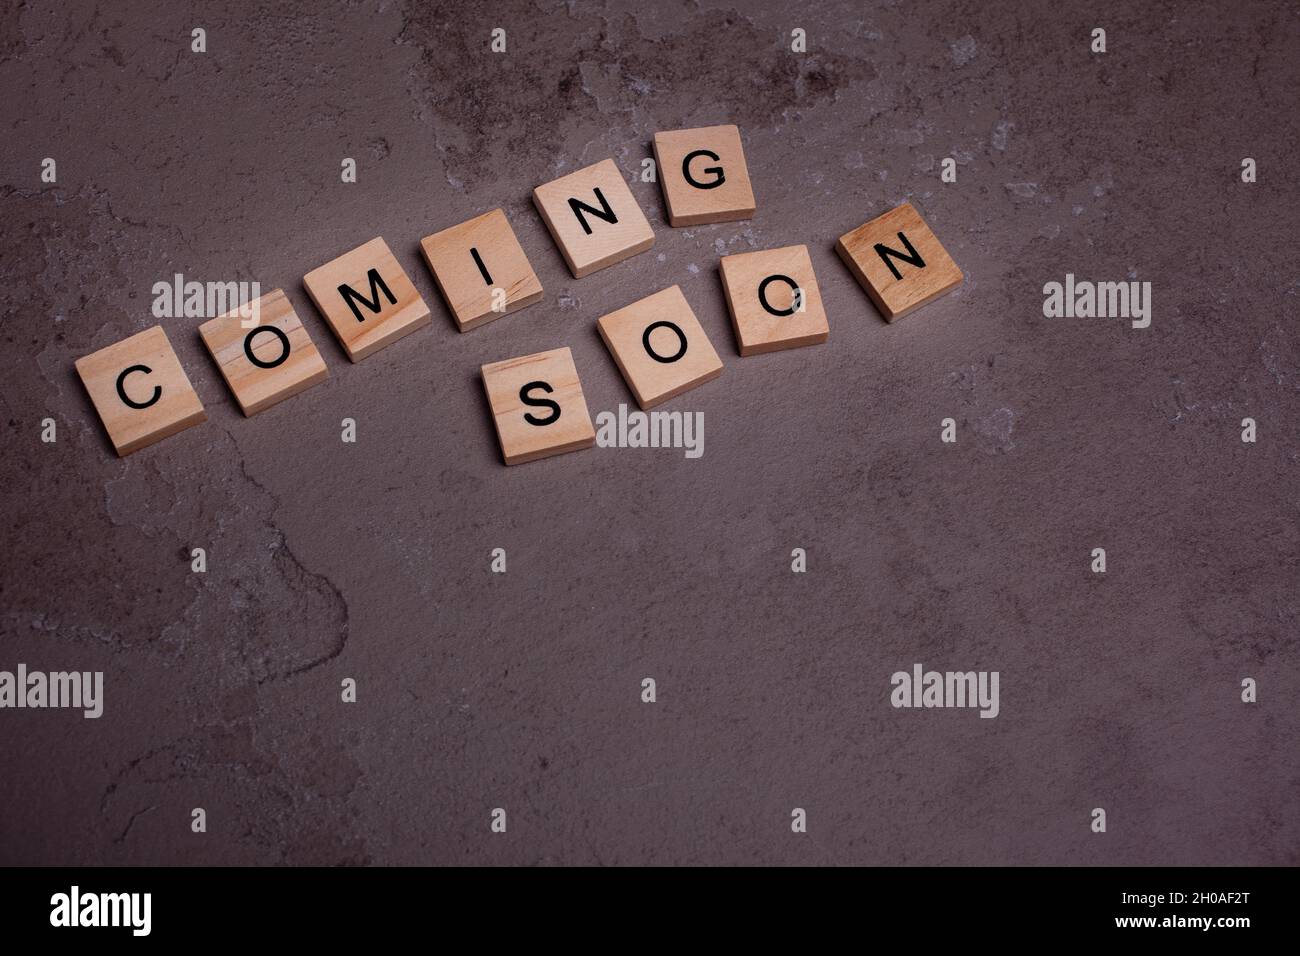 Wooden blocks with text Coming Soon - copyspace Stock Photo